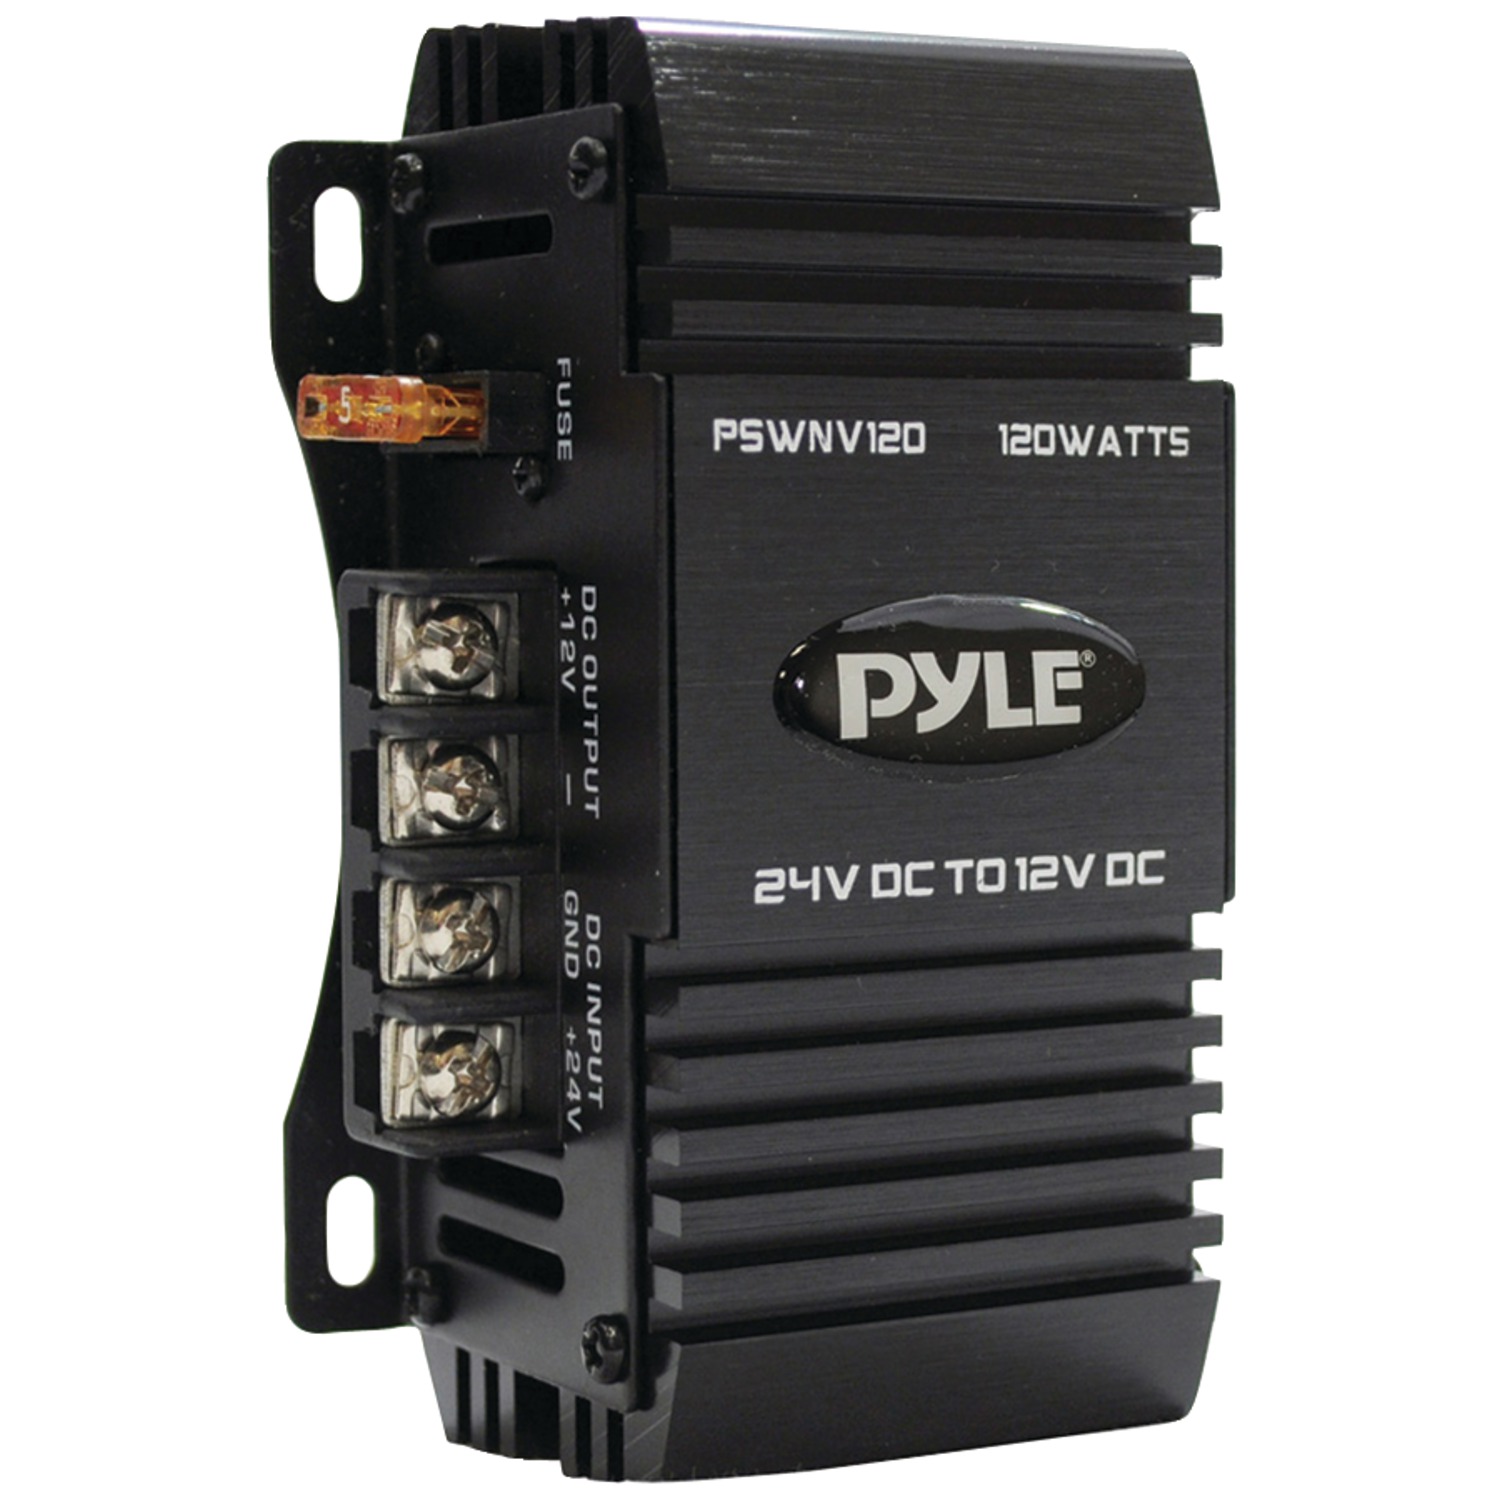 Pyle® Pswnv120 24-volt Dc To 12-volt Dc Step-down Converter With Pmw Technology (120 Watts) - image 3 of 3